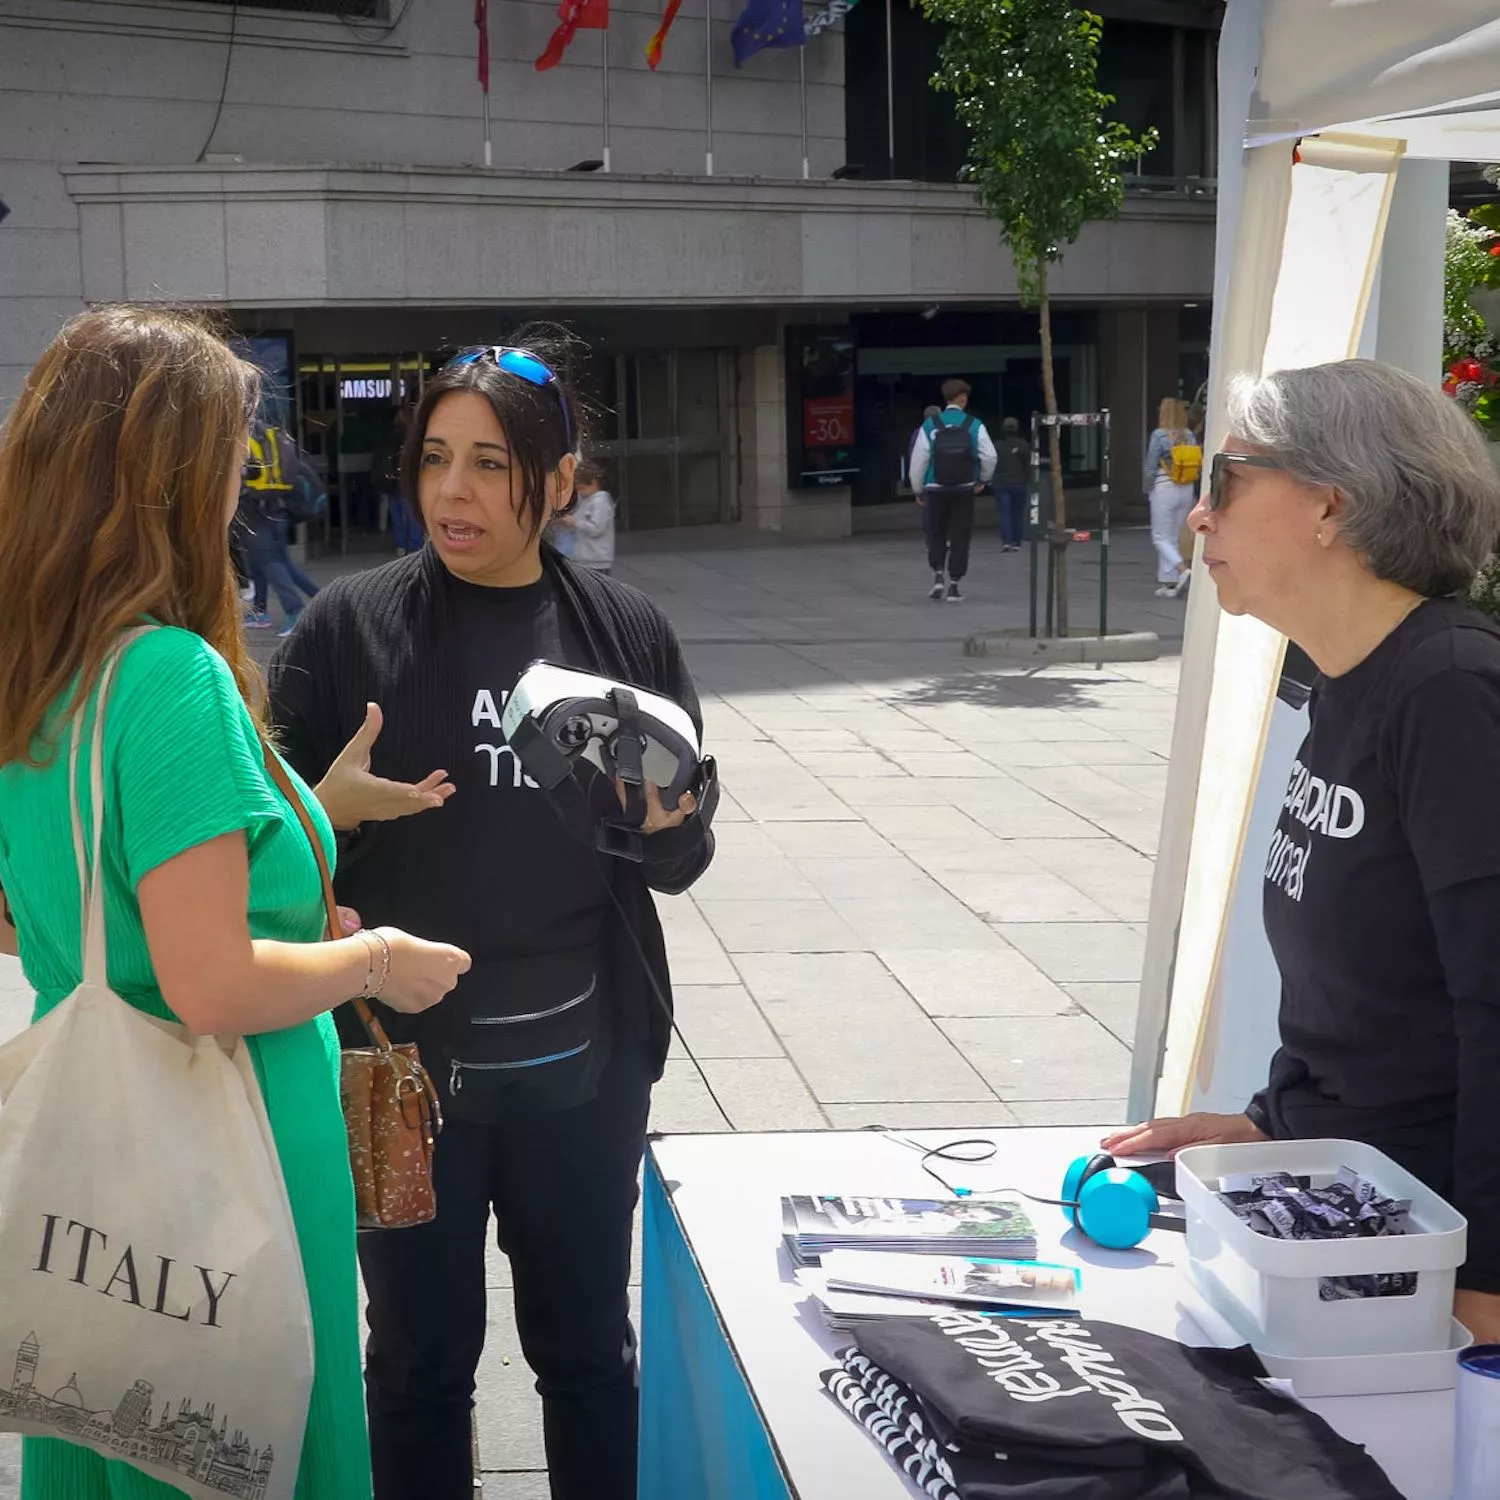 iAnimal at an informative event in Spain